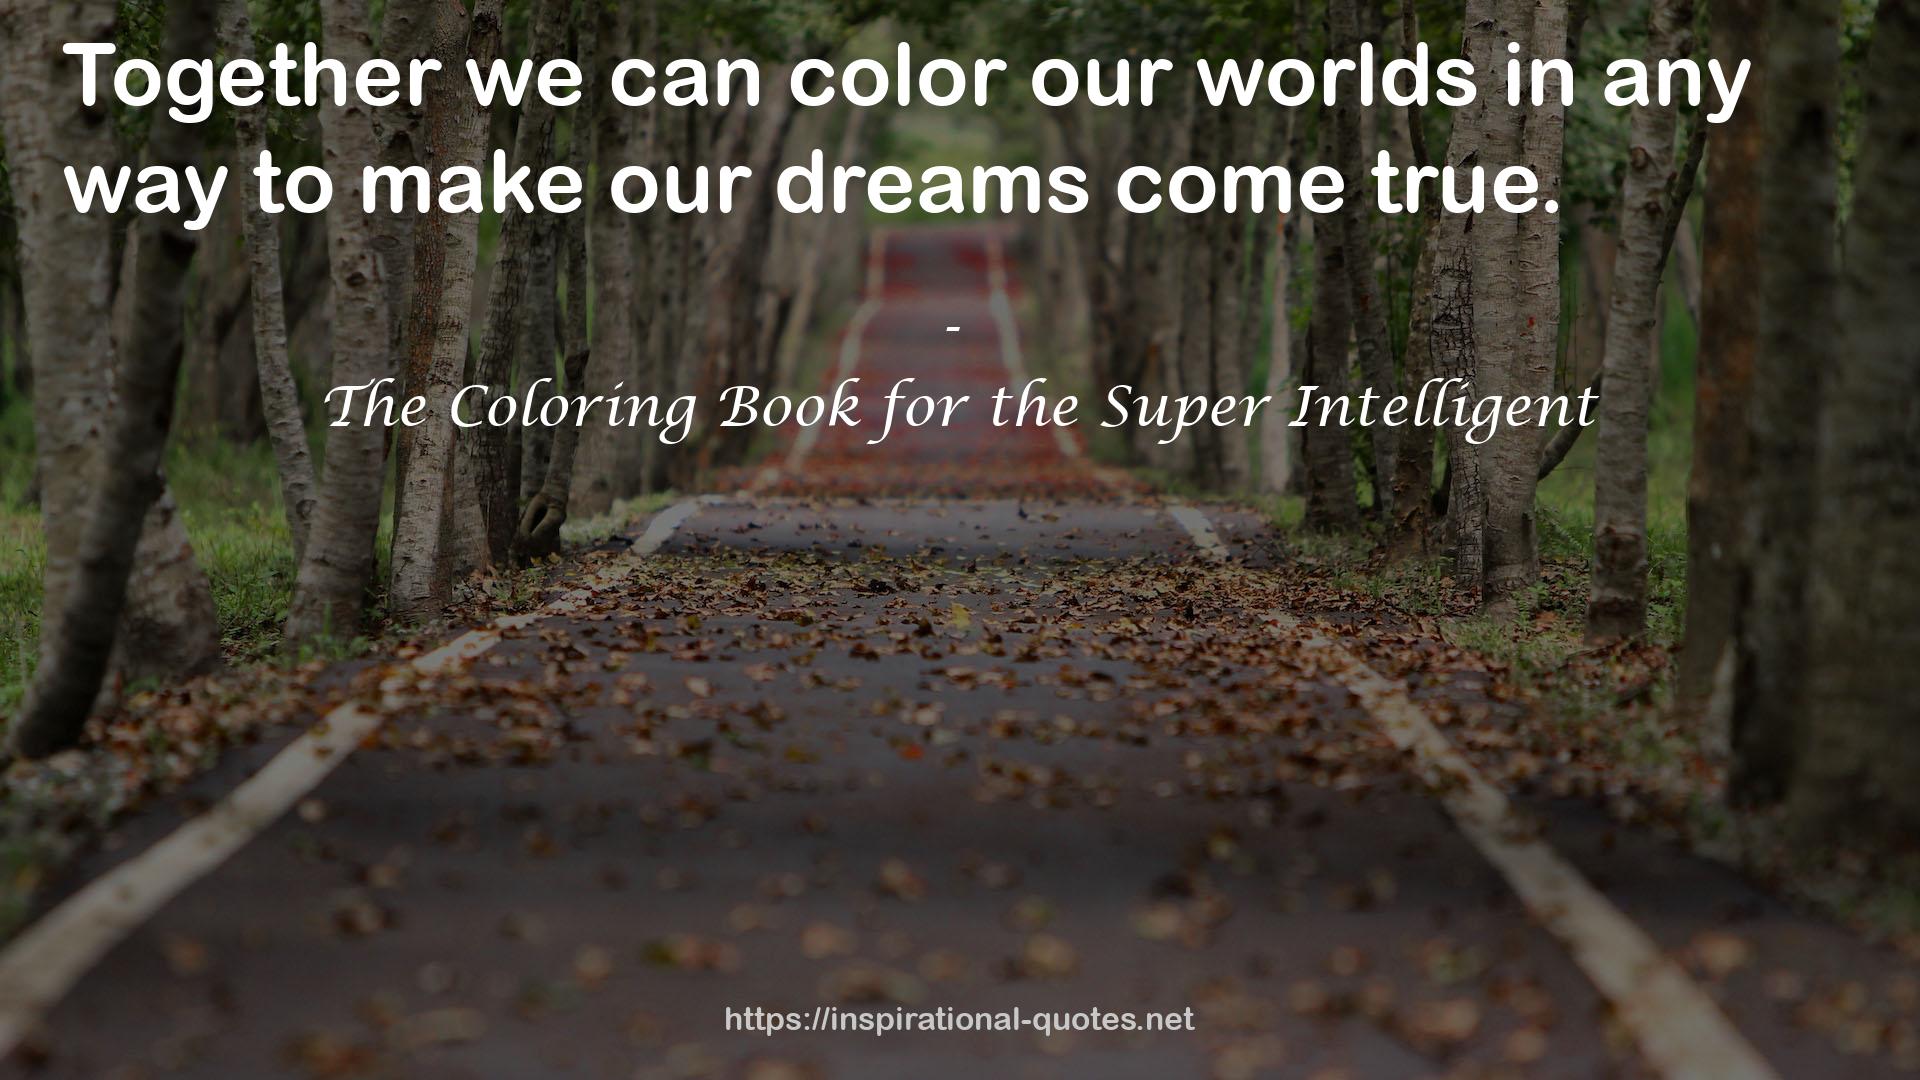 The Coloring Book for the Super Intelligent QUOTES